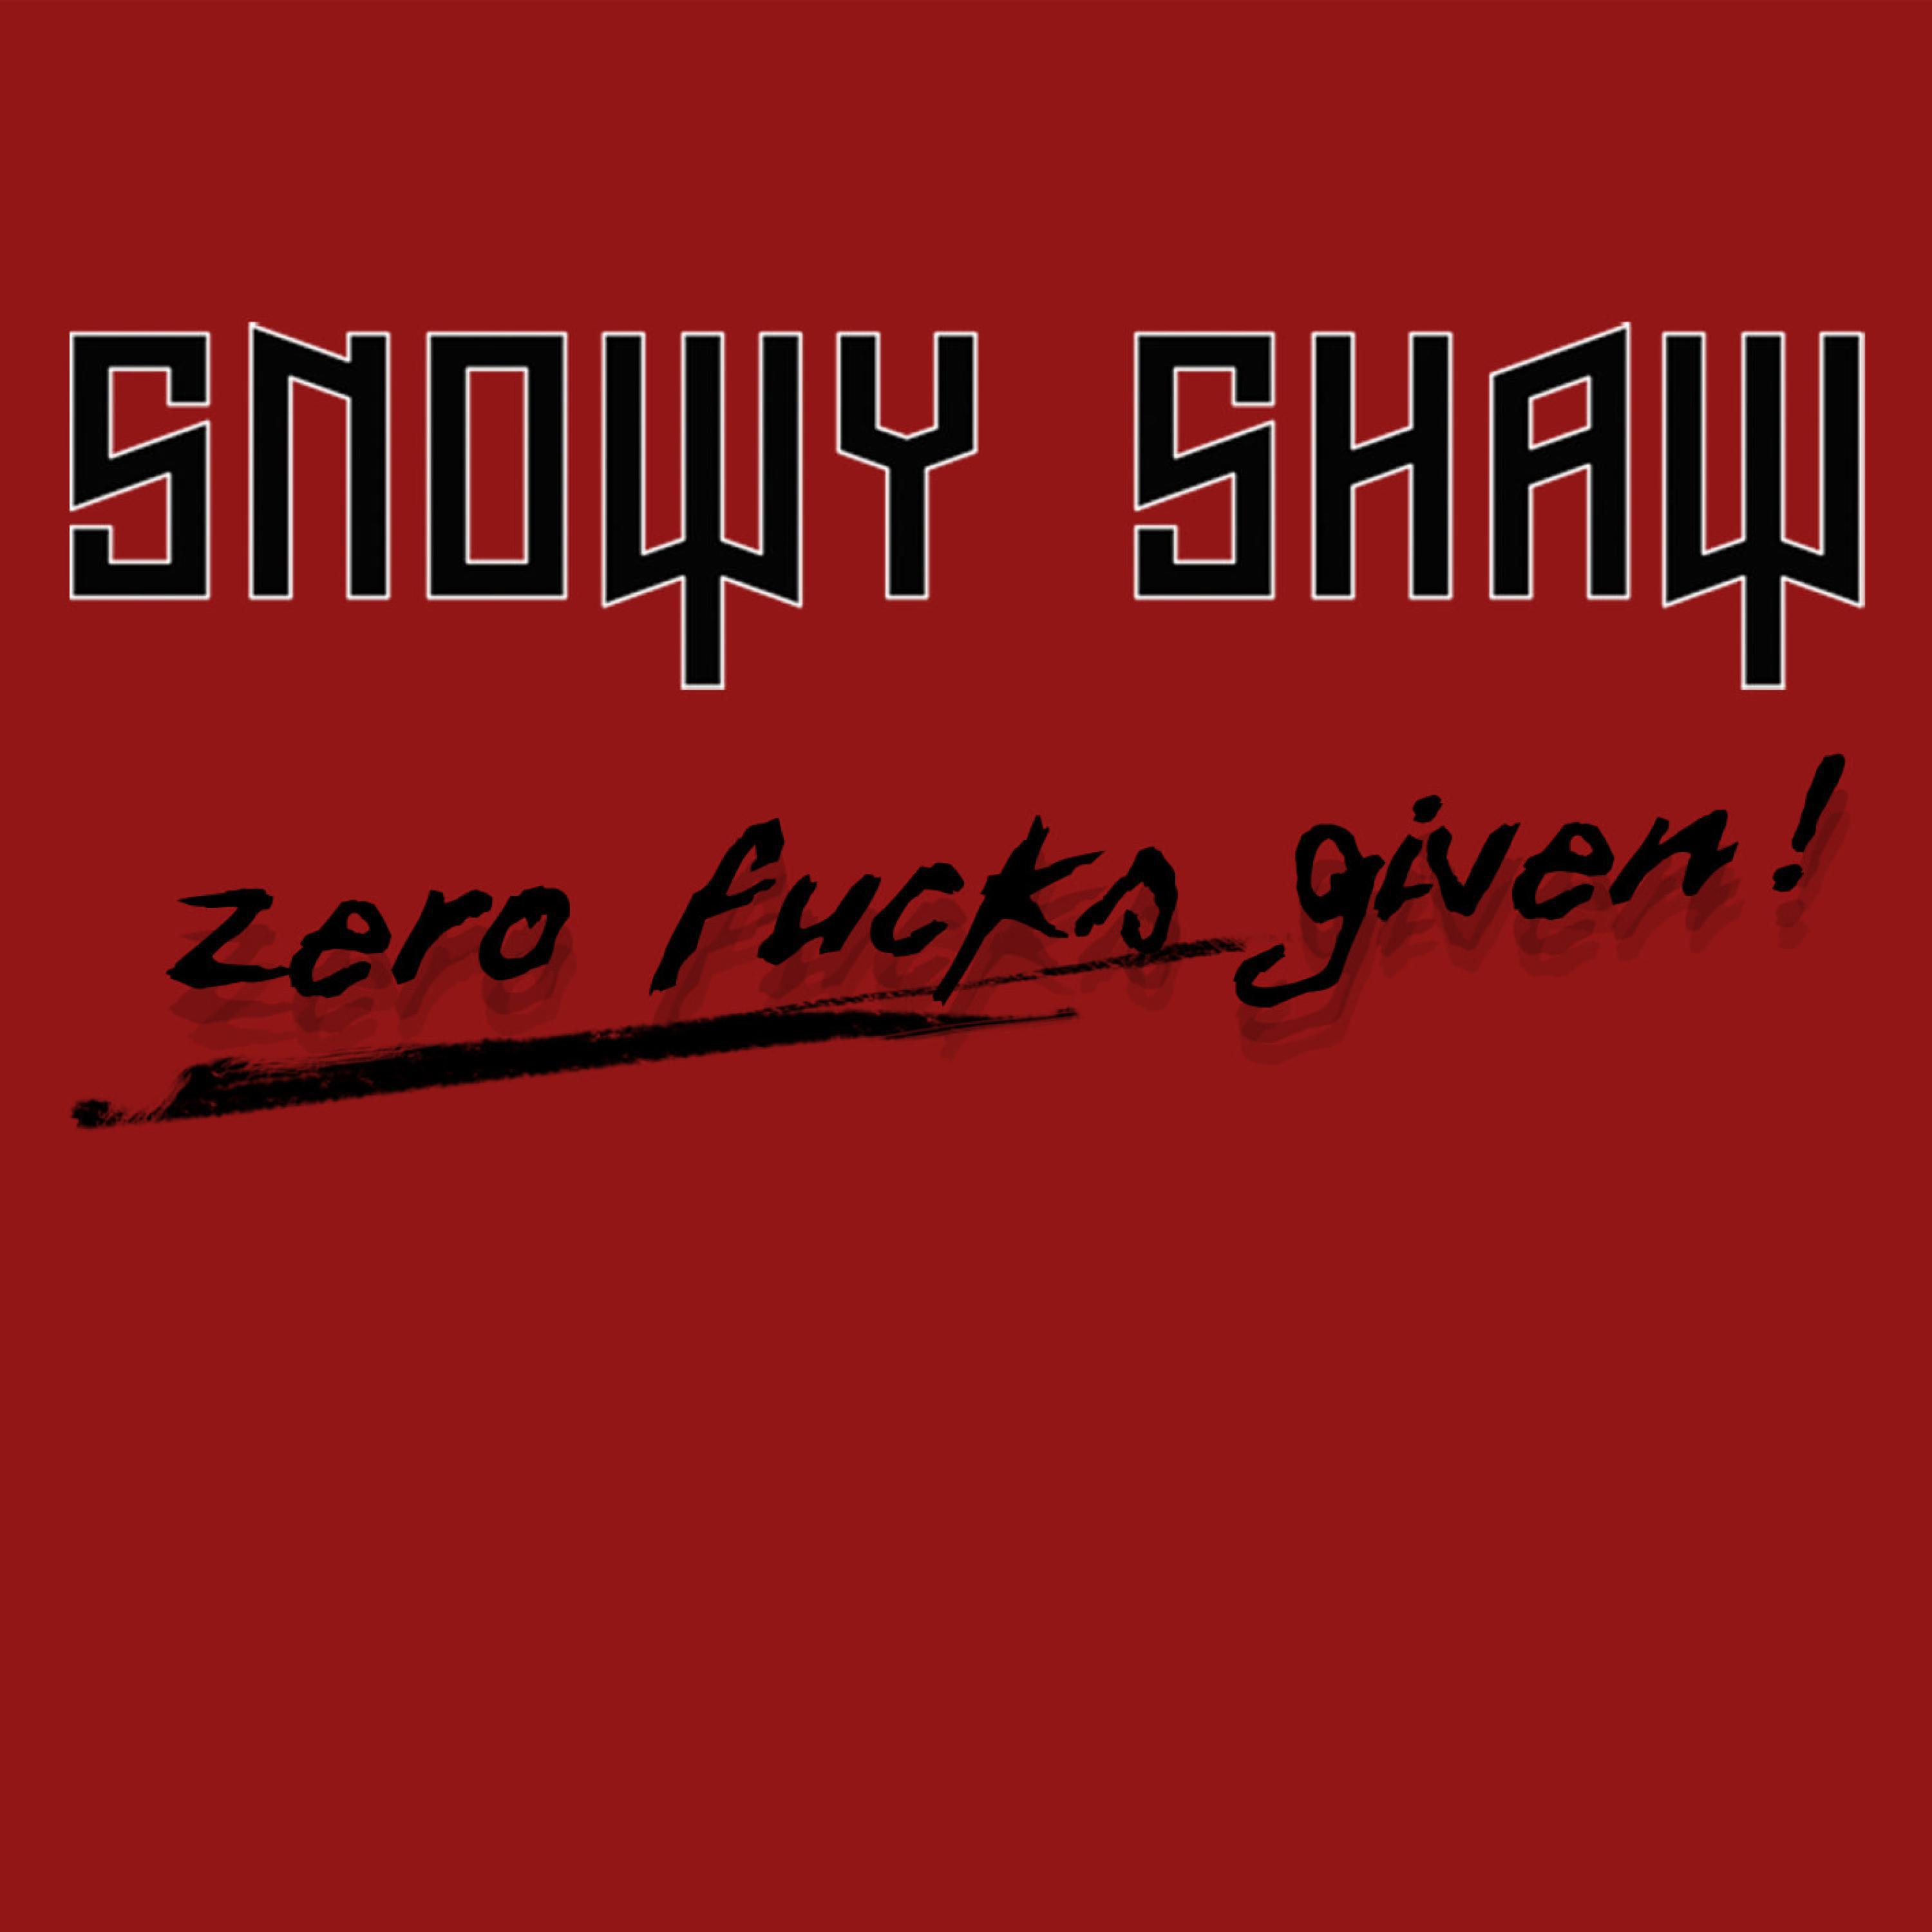 Snowy Shaw - Zero ****s Given (Bonus Track from the physical album 